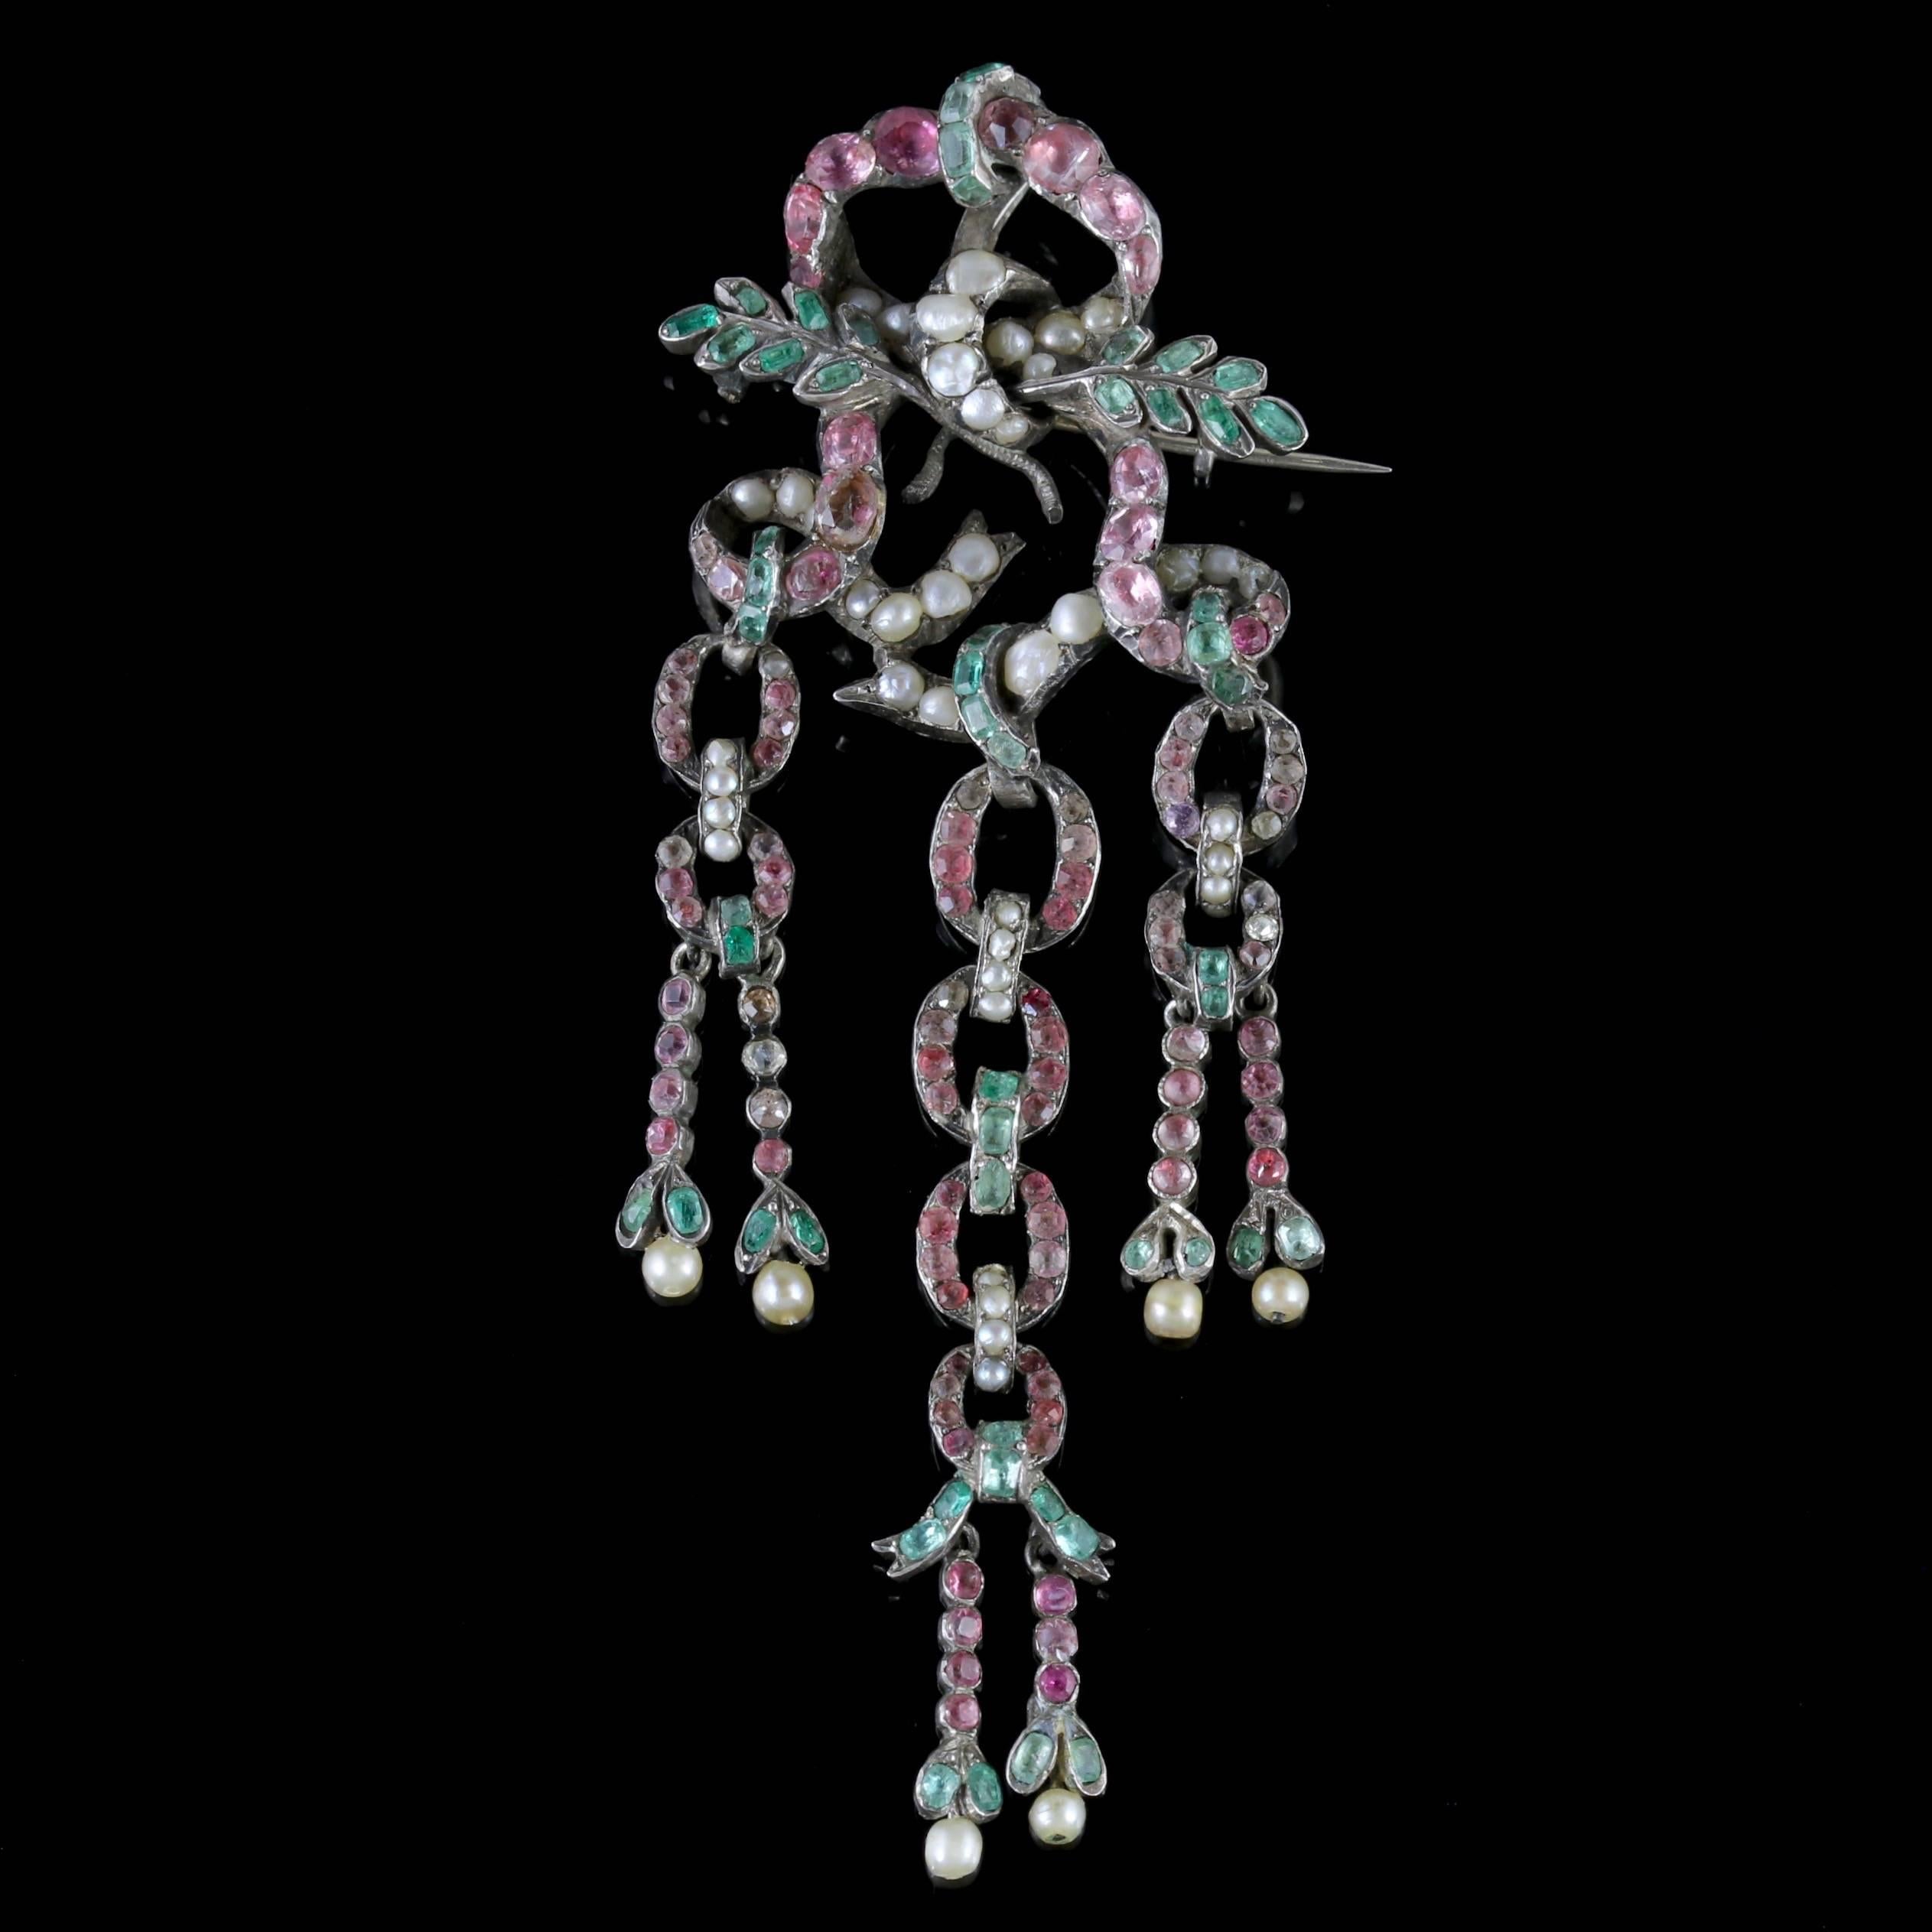 To read more please click continue reading below-

This fabulous antique French dropper brooch was made during the Victorian era, Circa 1900.

The beautiful brooch boasts three long chain link droppers with two more droppers dangling from each.